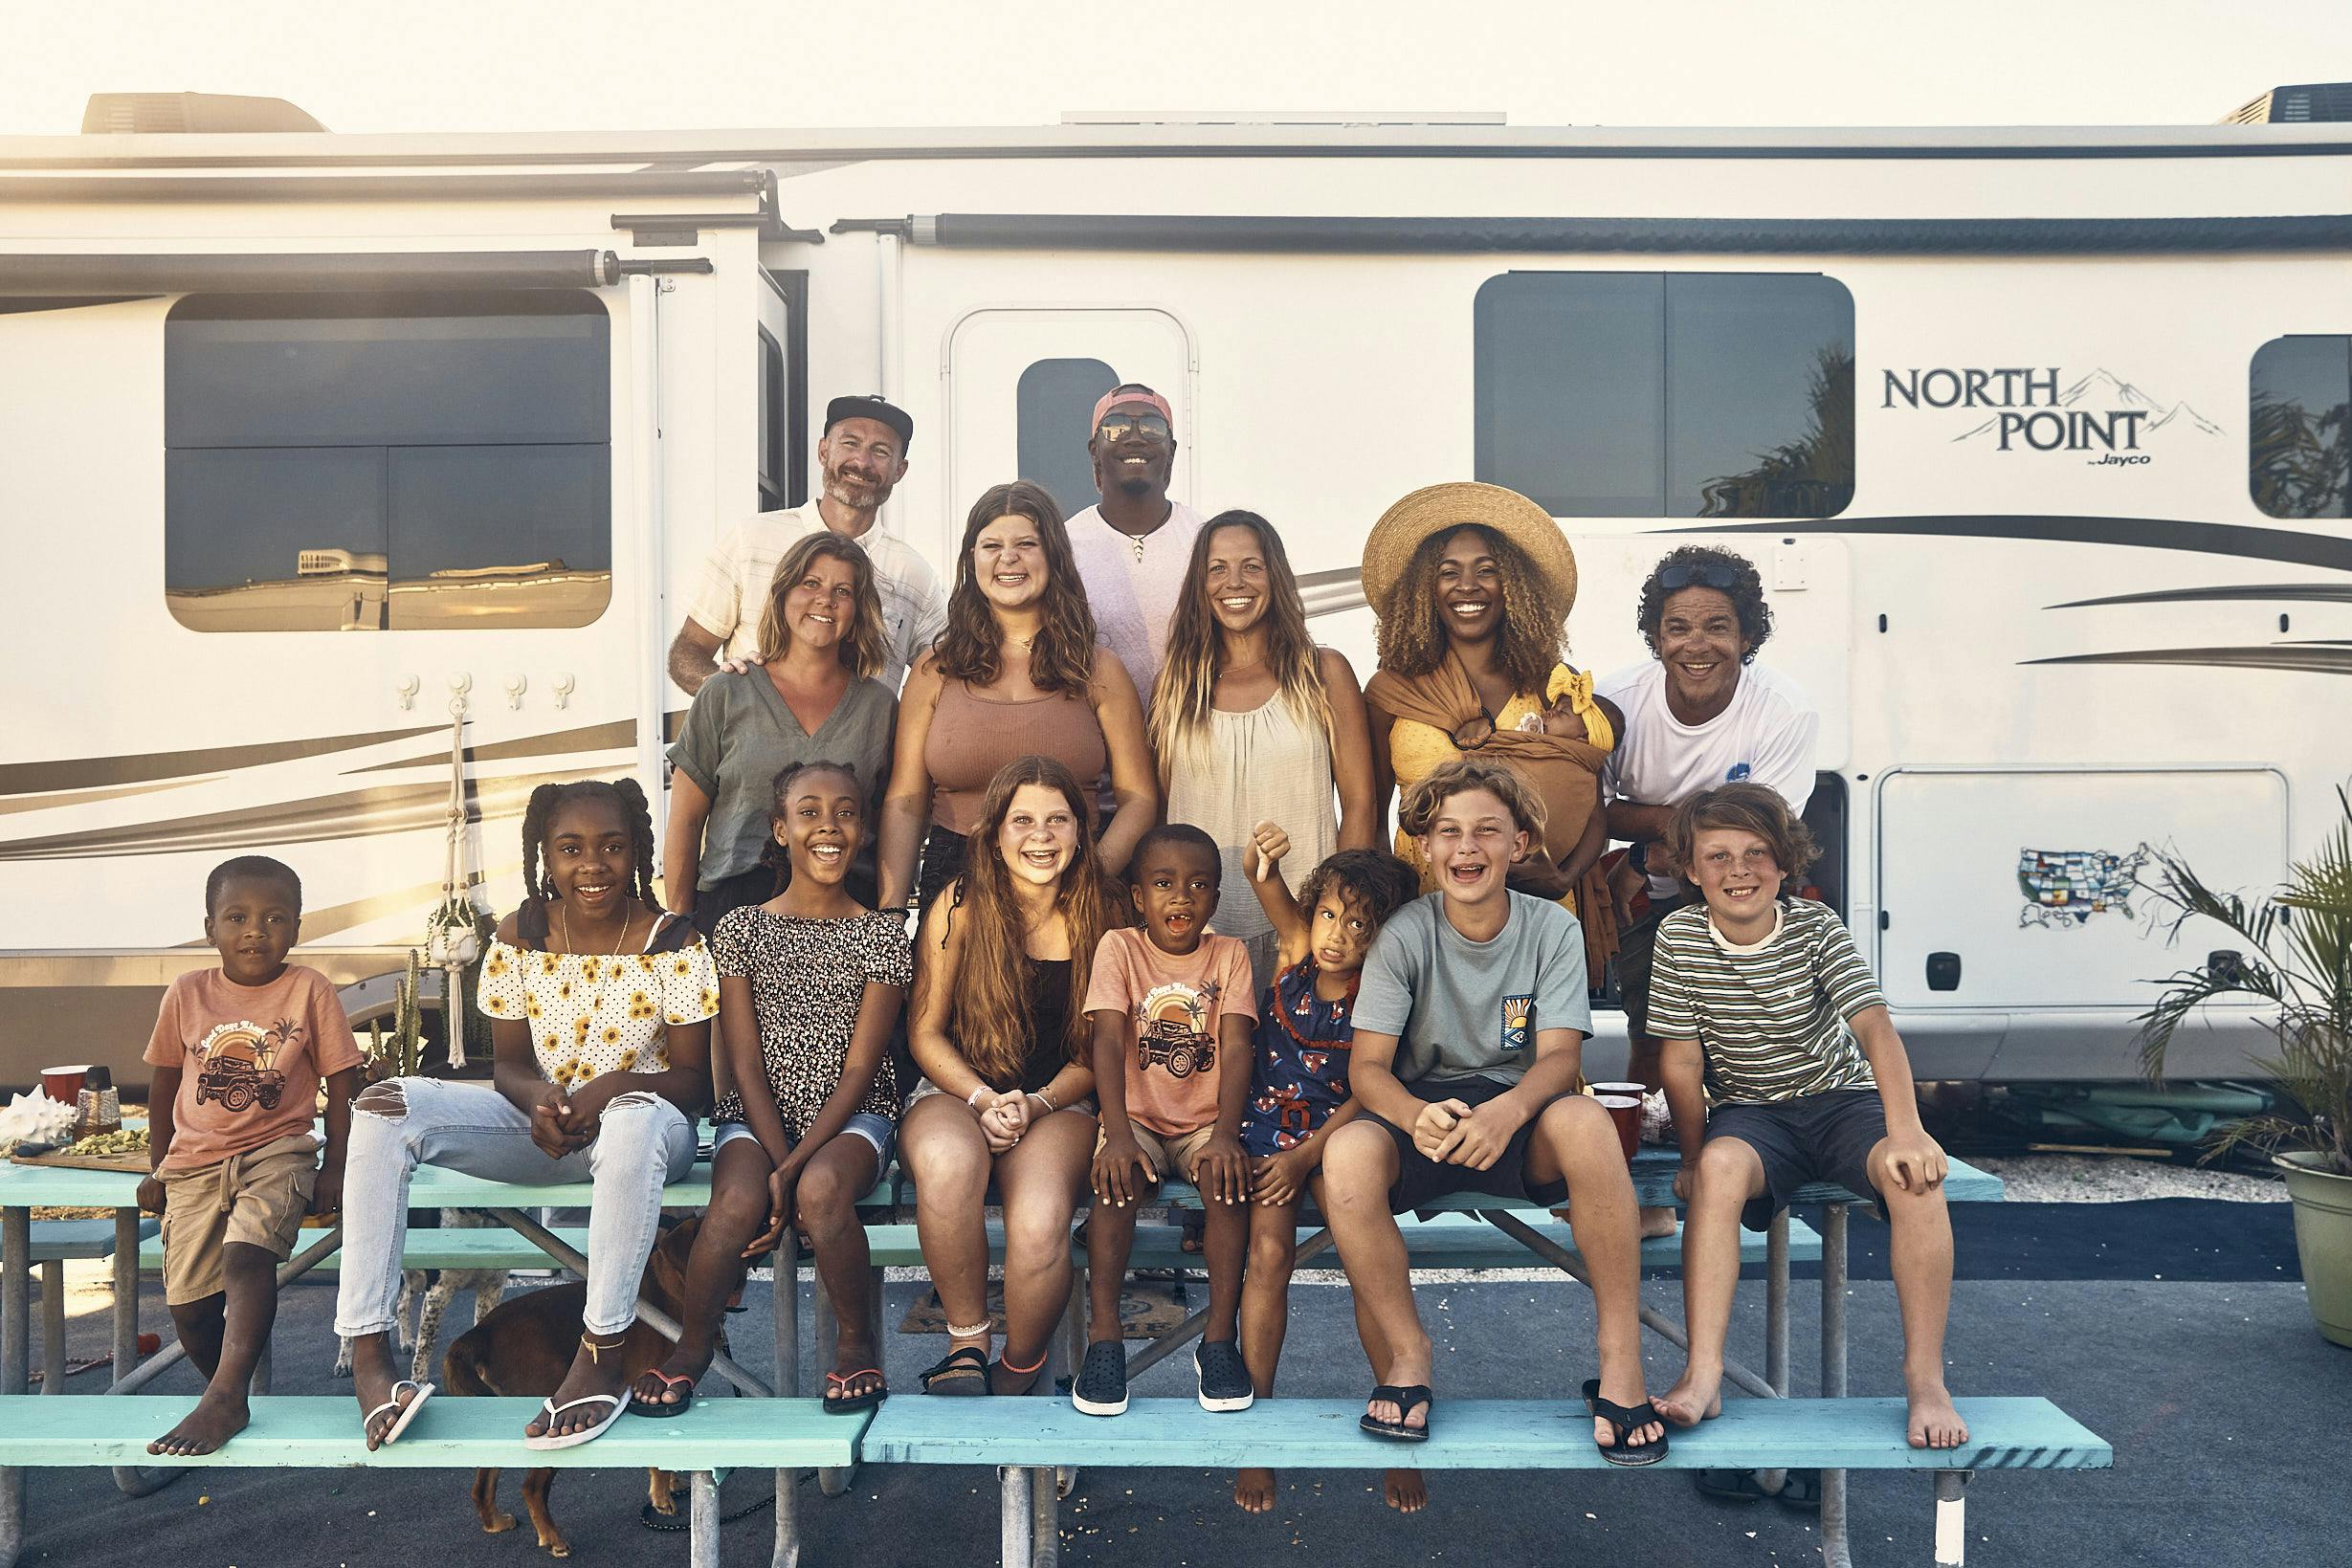 The Lanes and their friends smile for a group photo in front of an RV